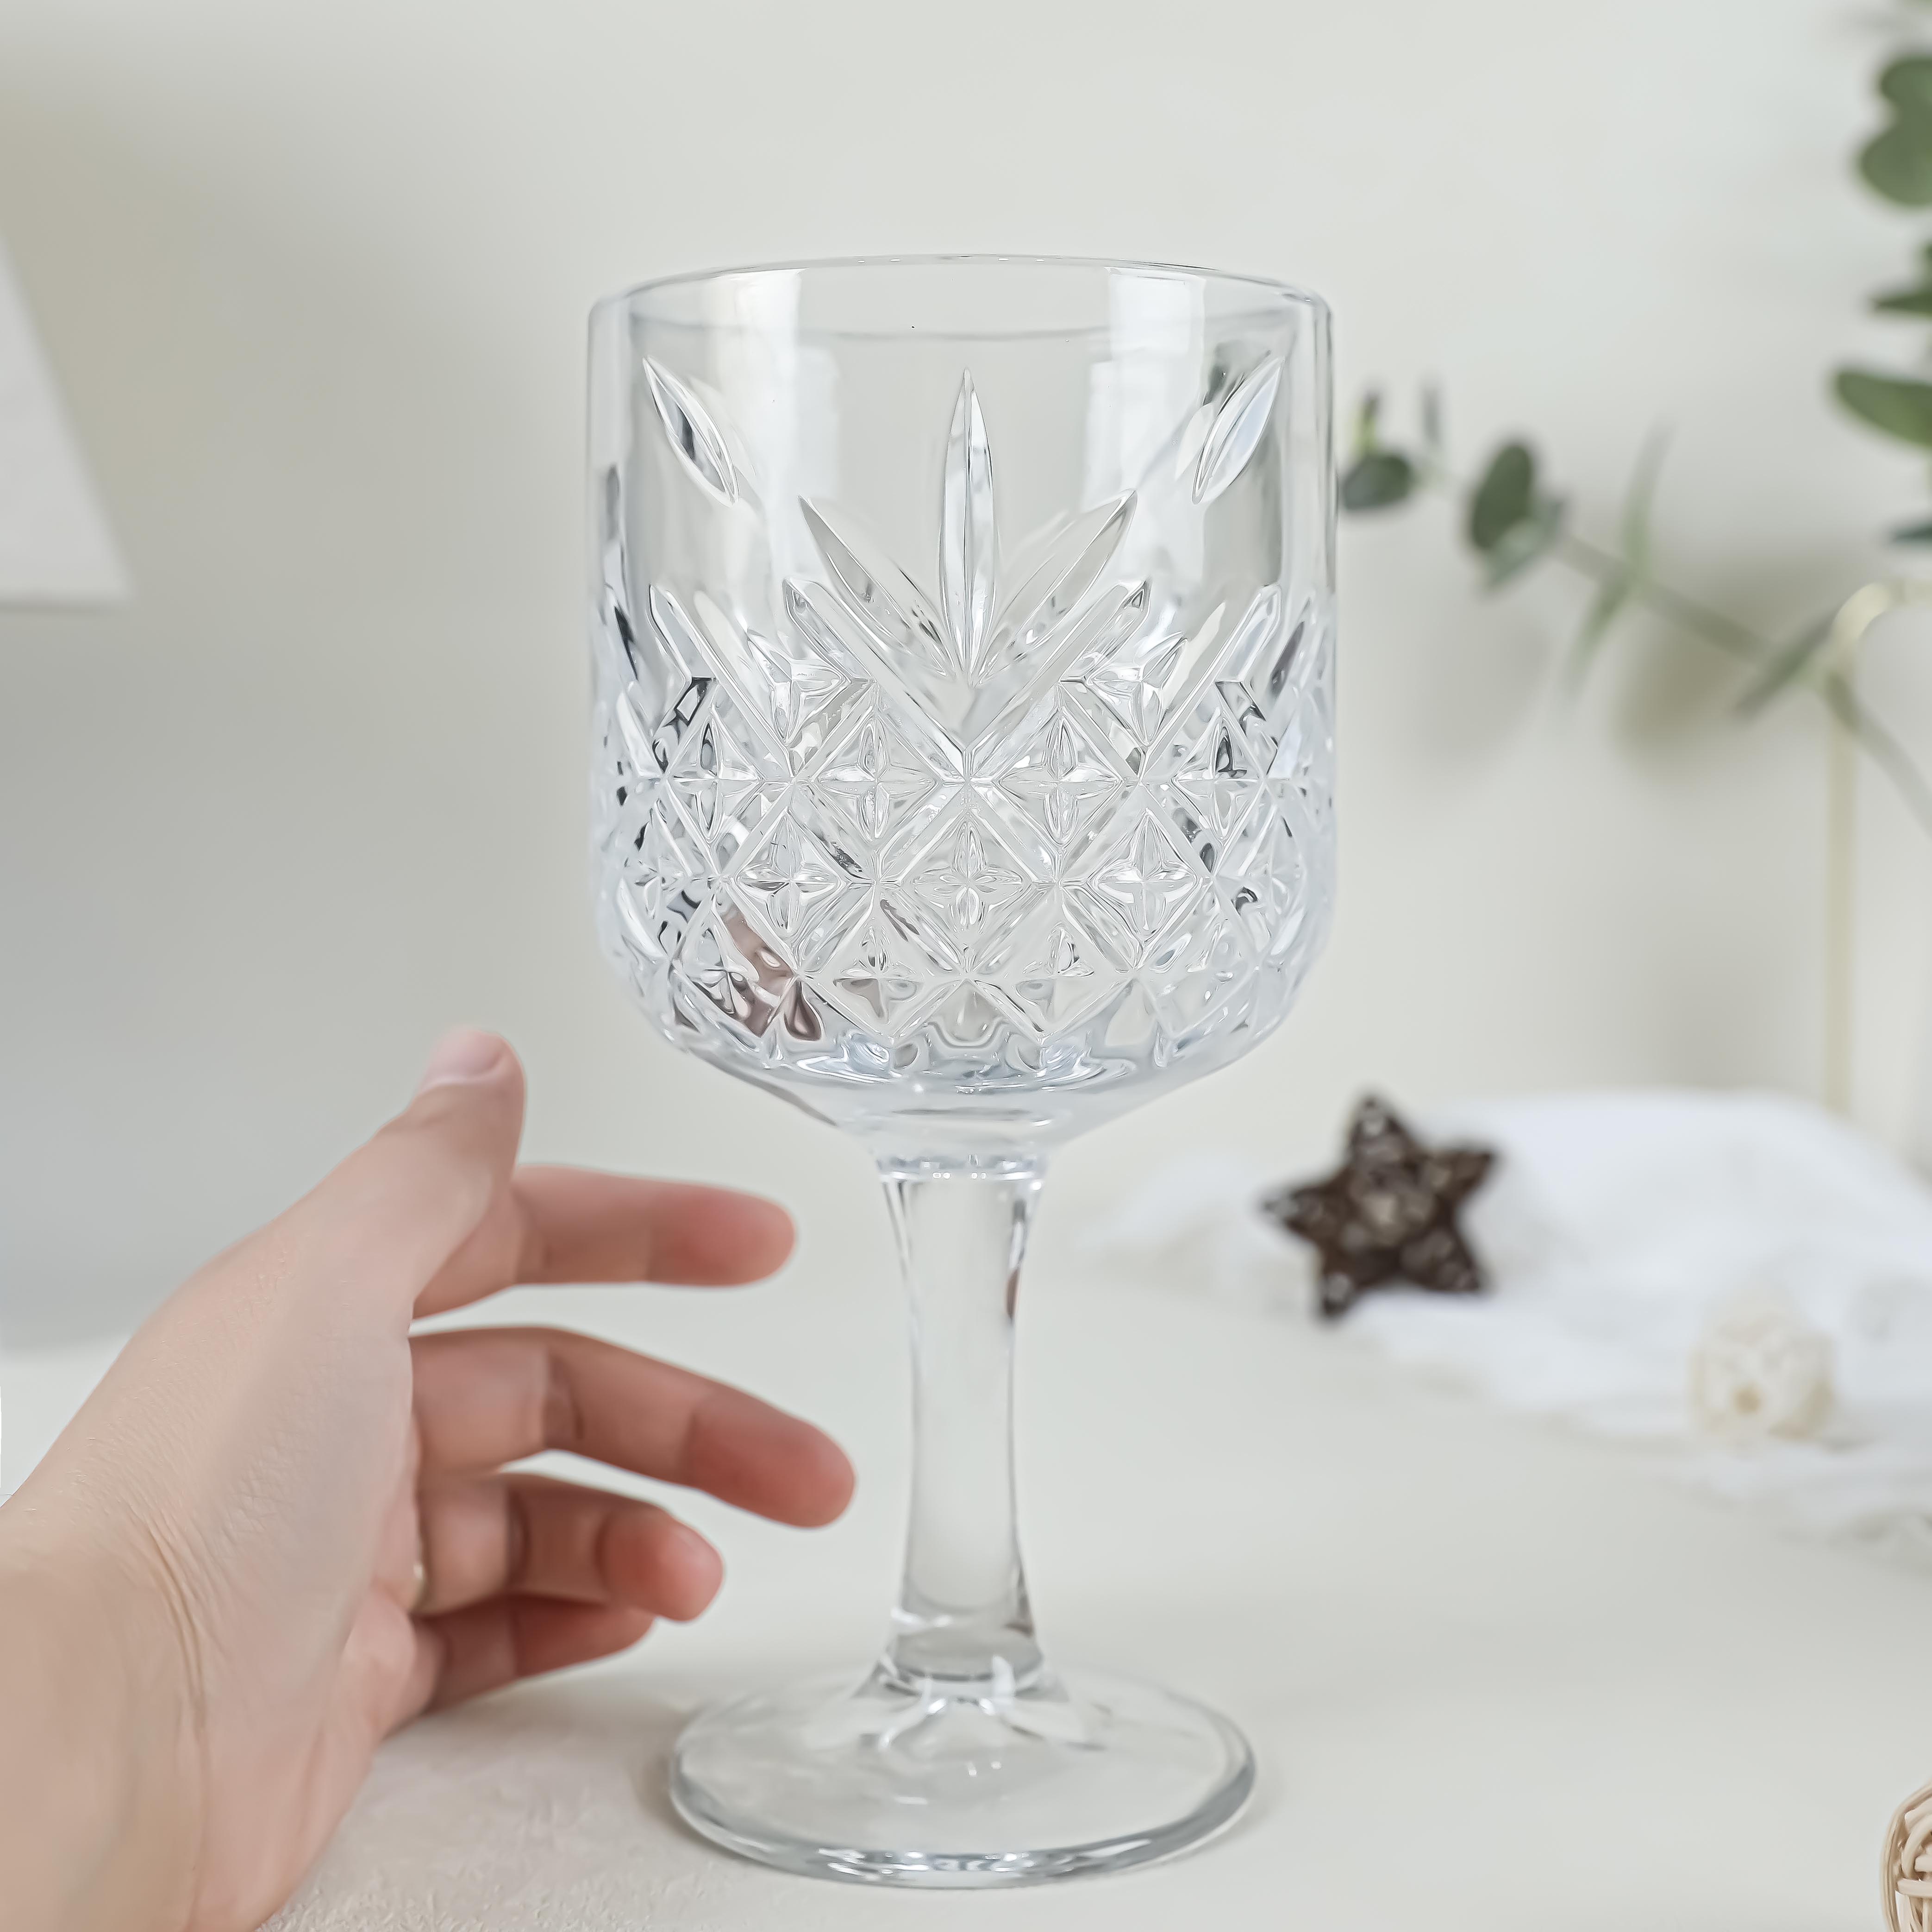 How to choose the right glass goblets?